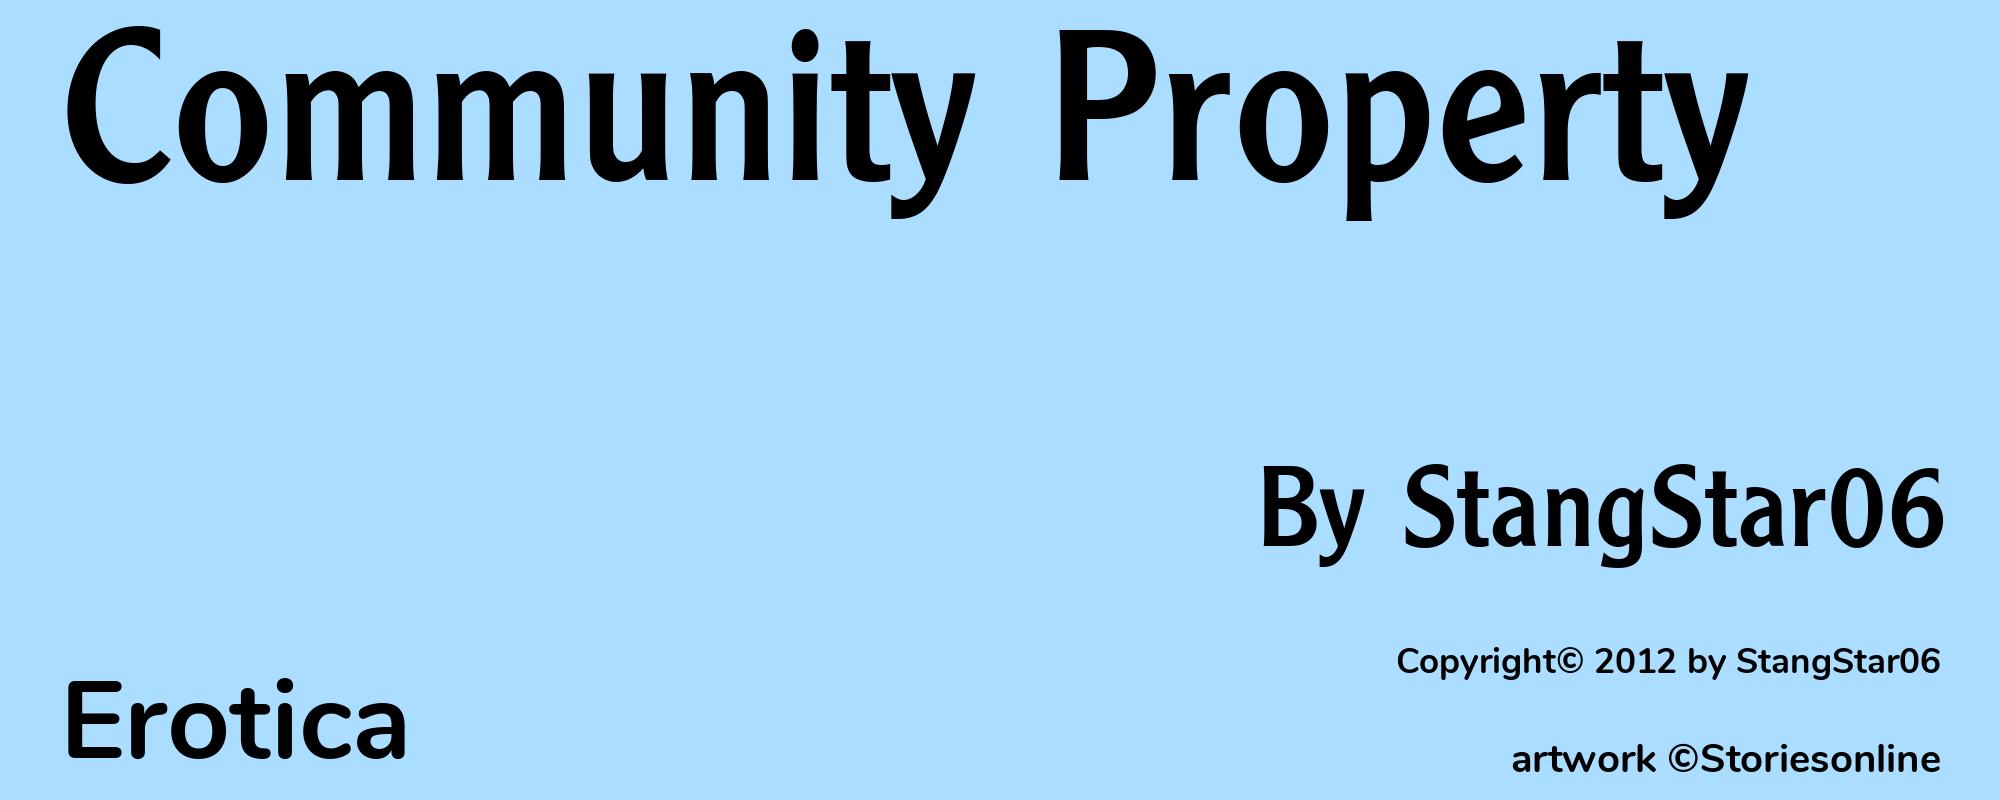 Community Property - Cover